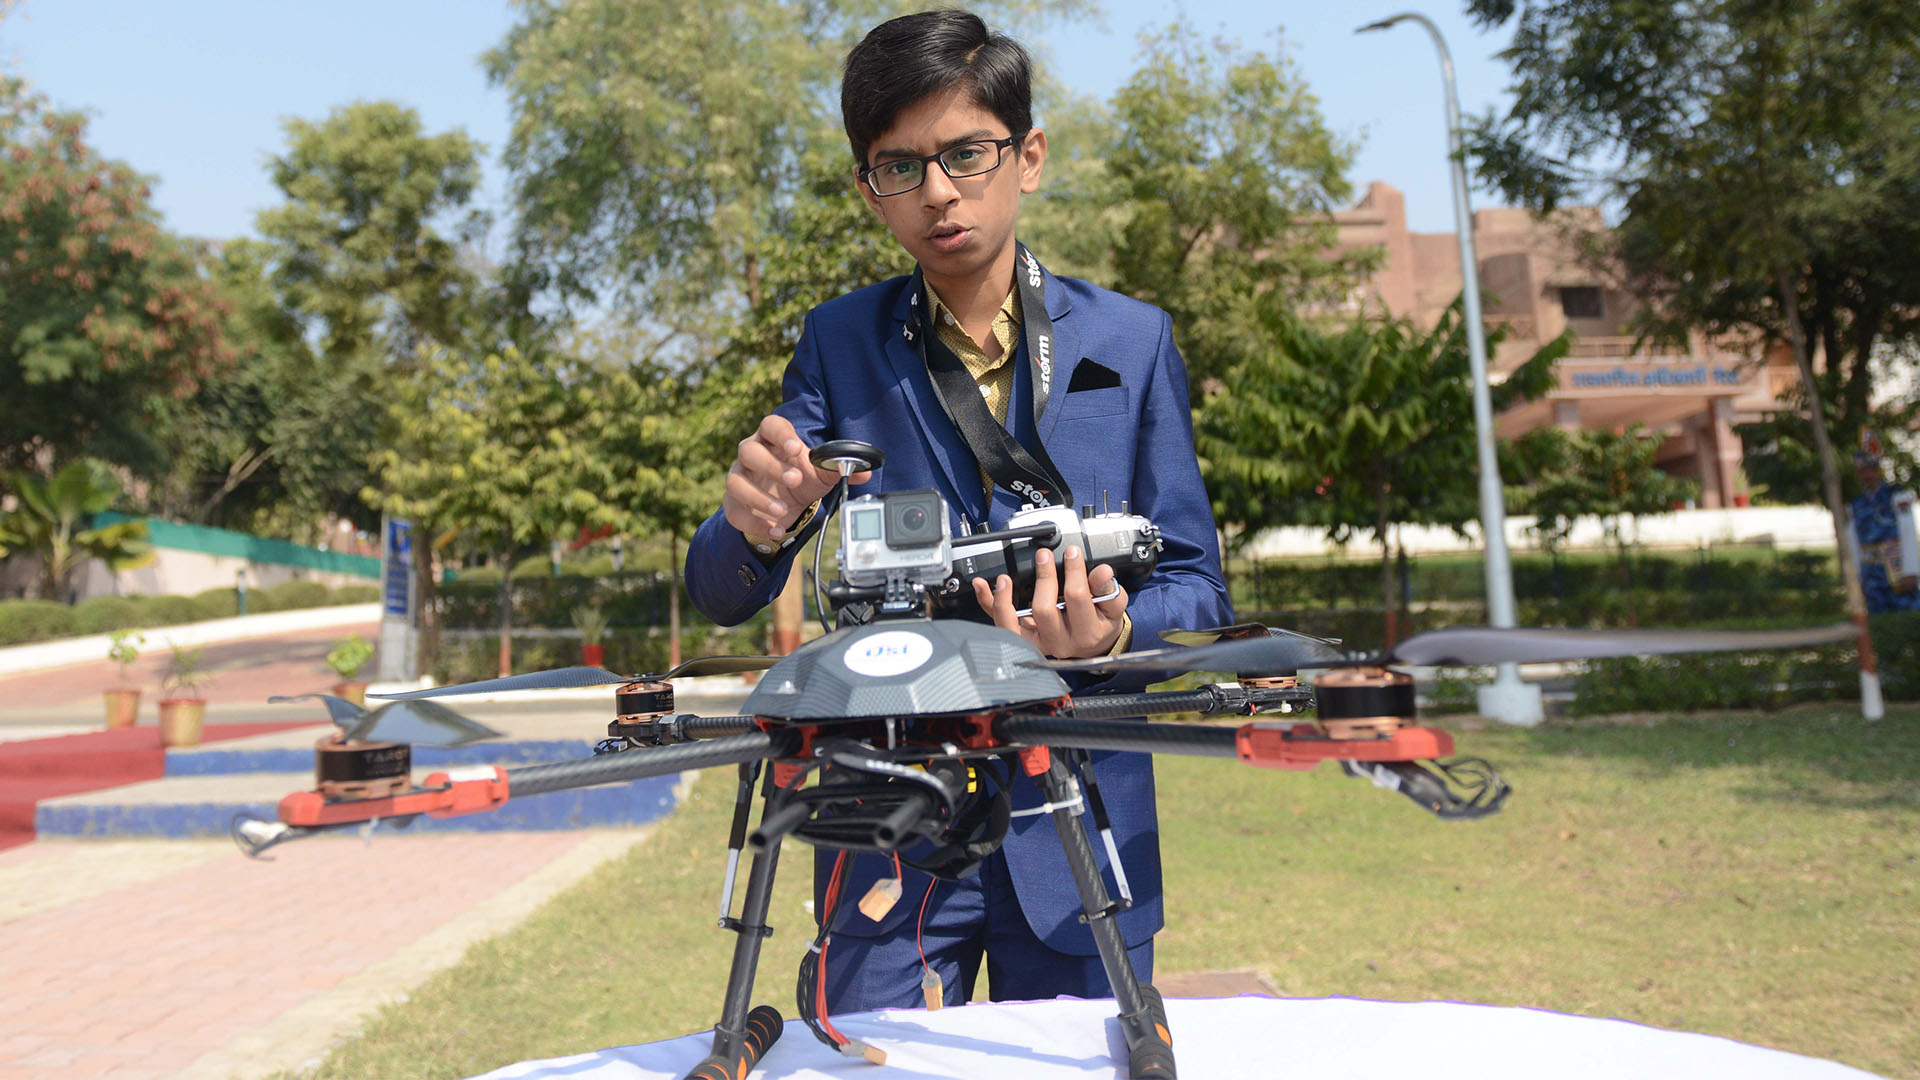 This 15-year-old boy developed a designed to detect and destroy landmines